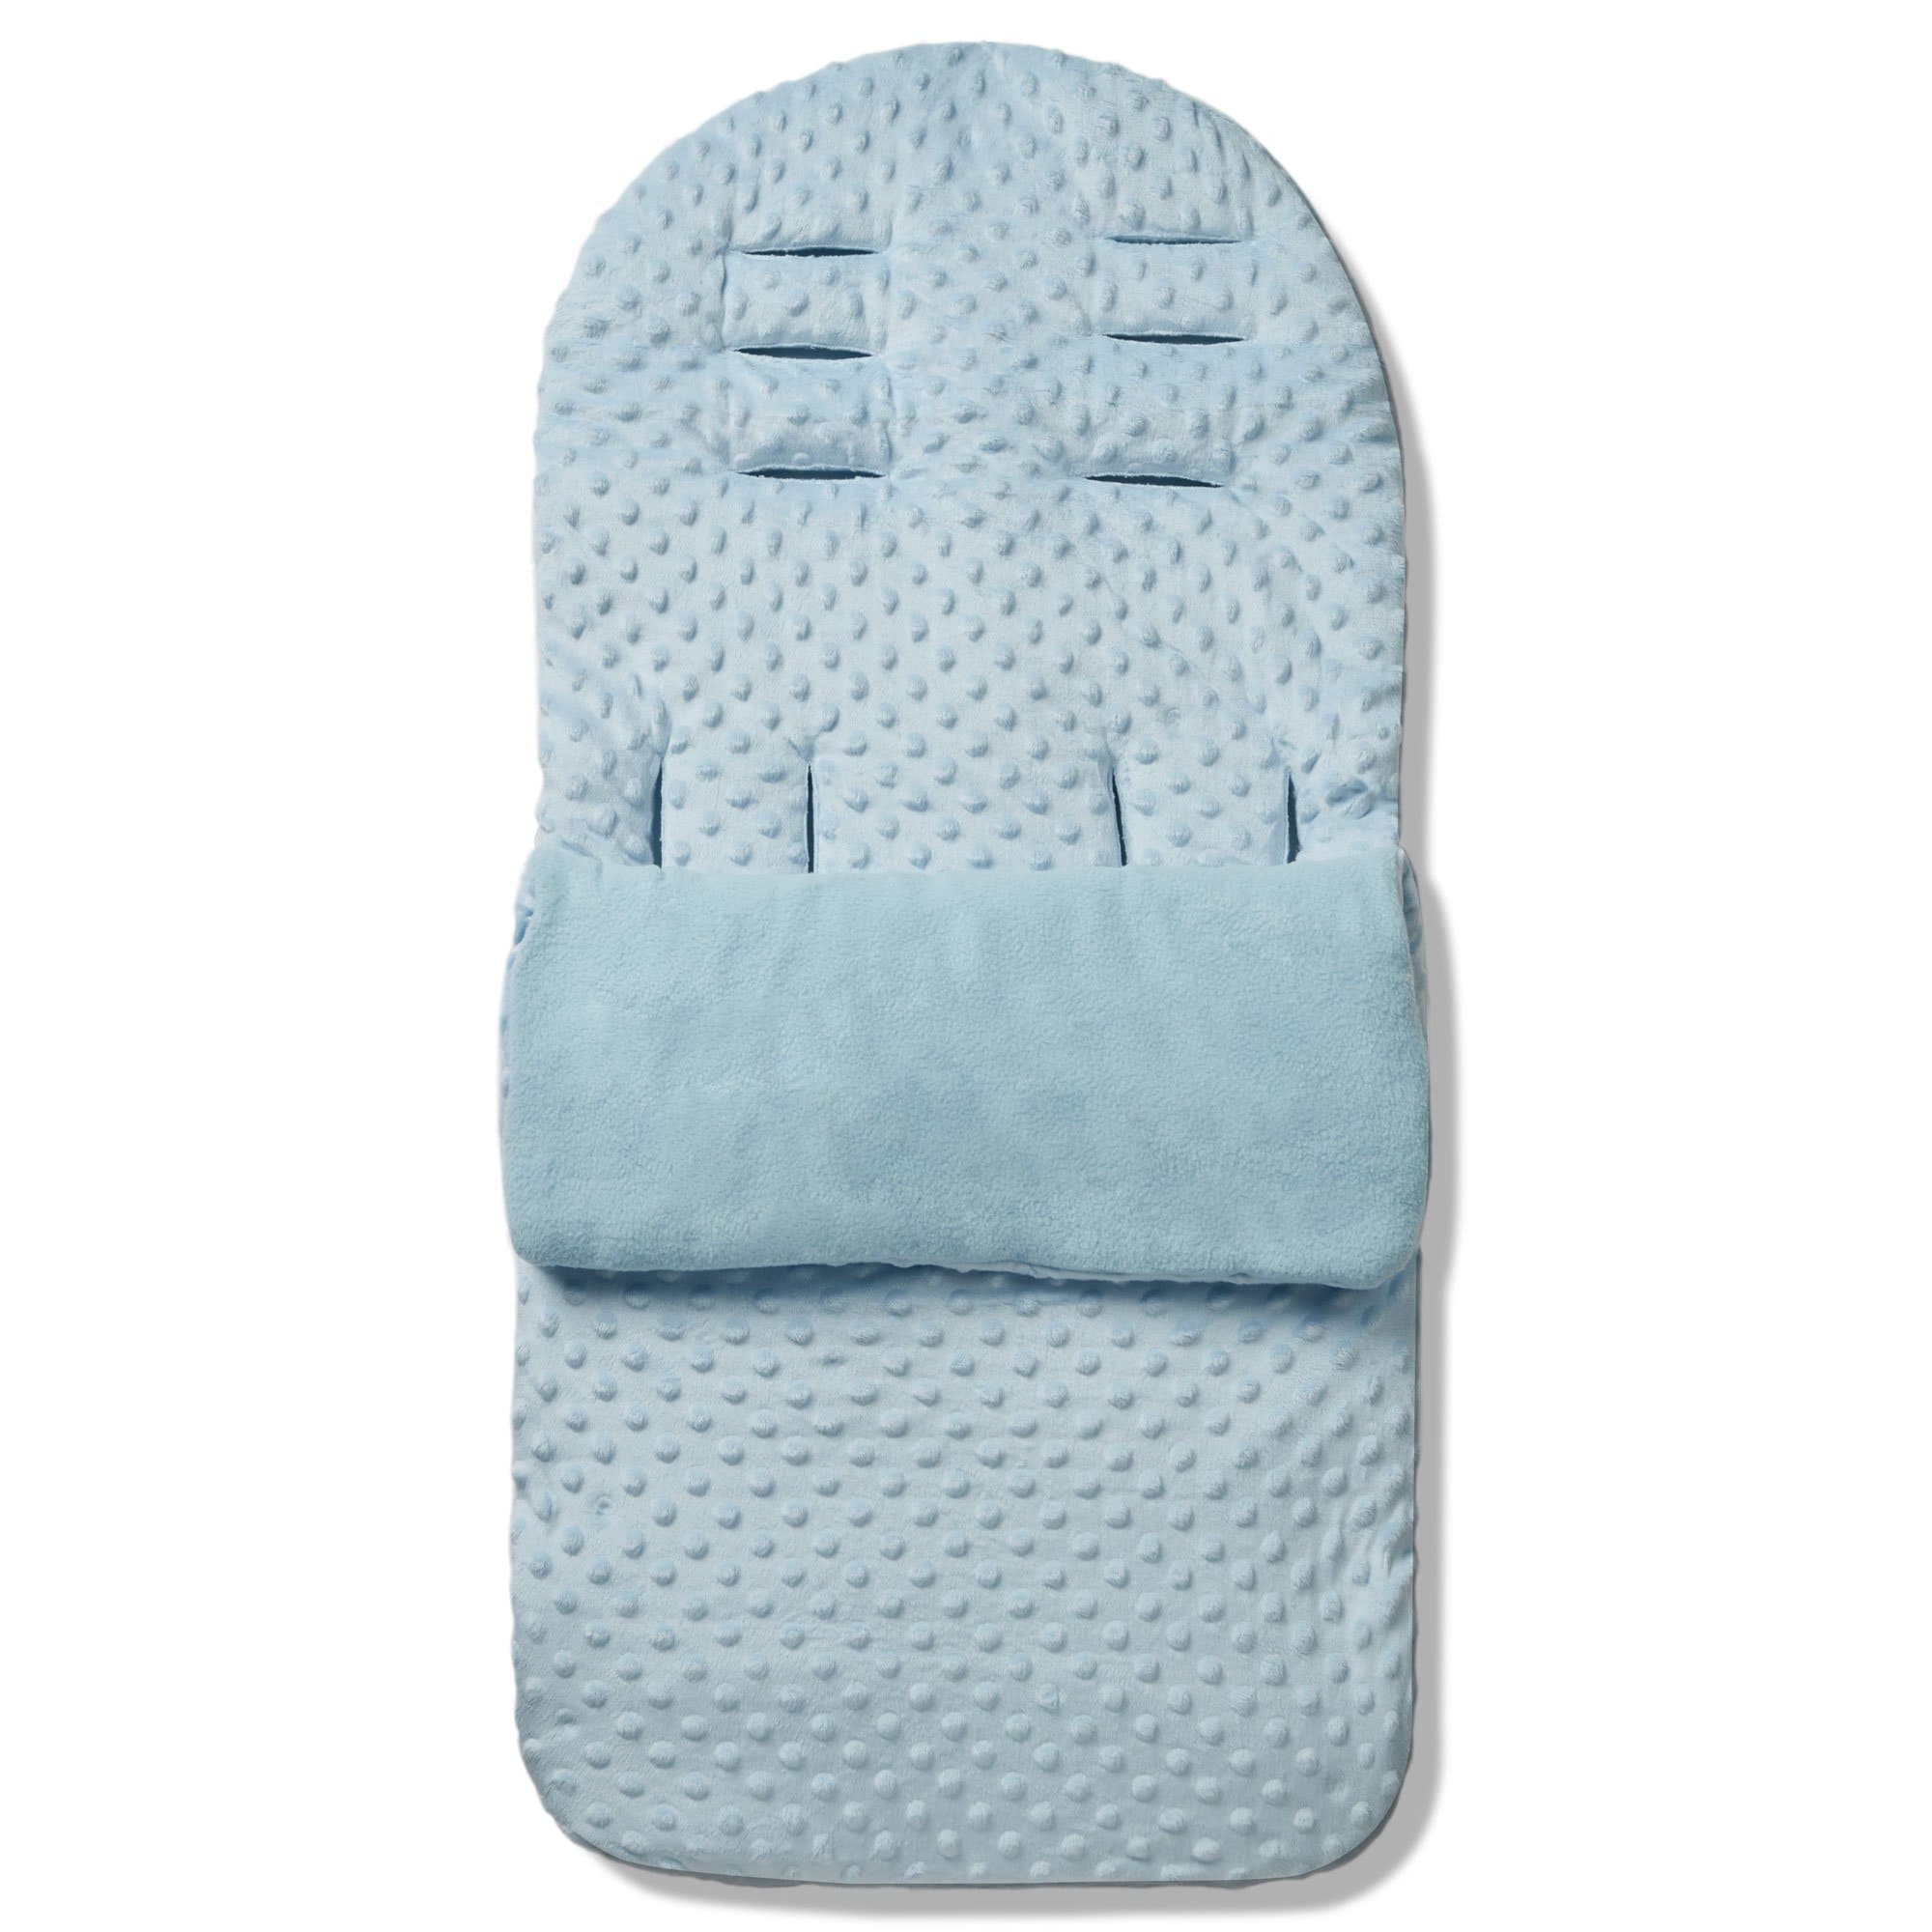 Dimple Footmuff / Cosy Toes Compatible with Looping - For Your Little One